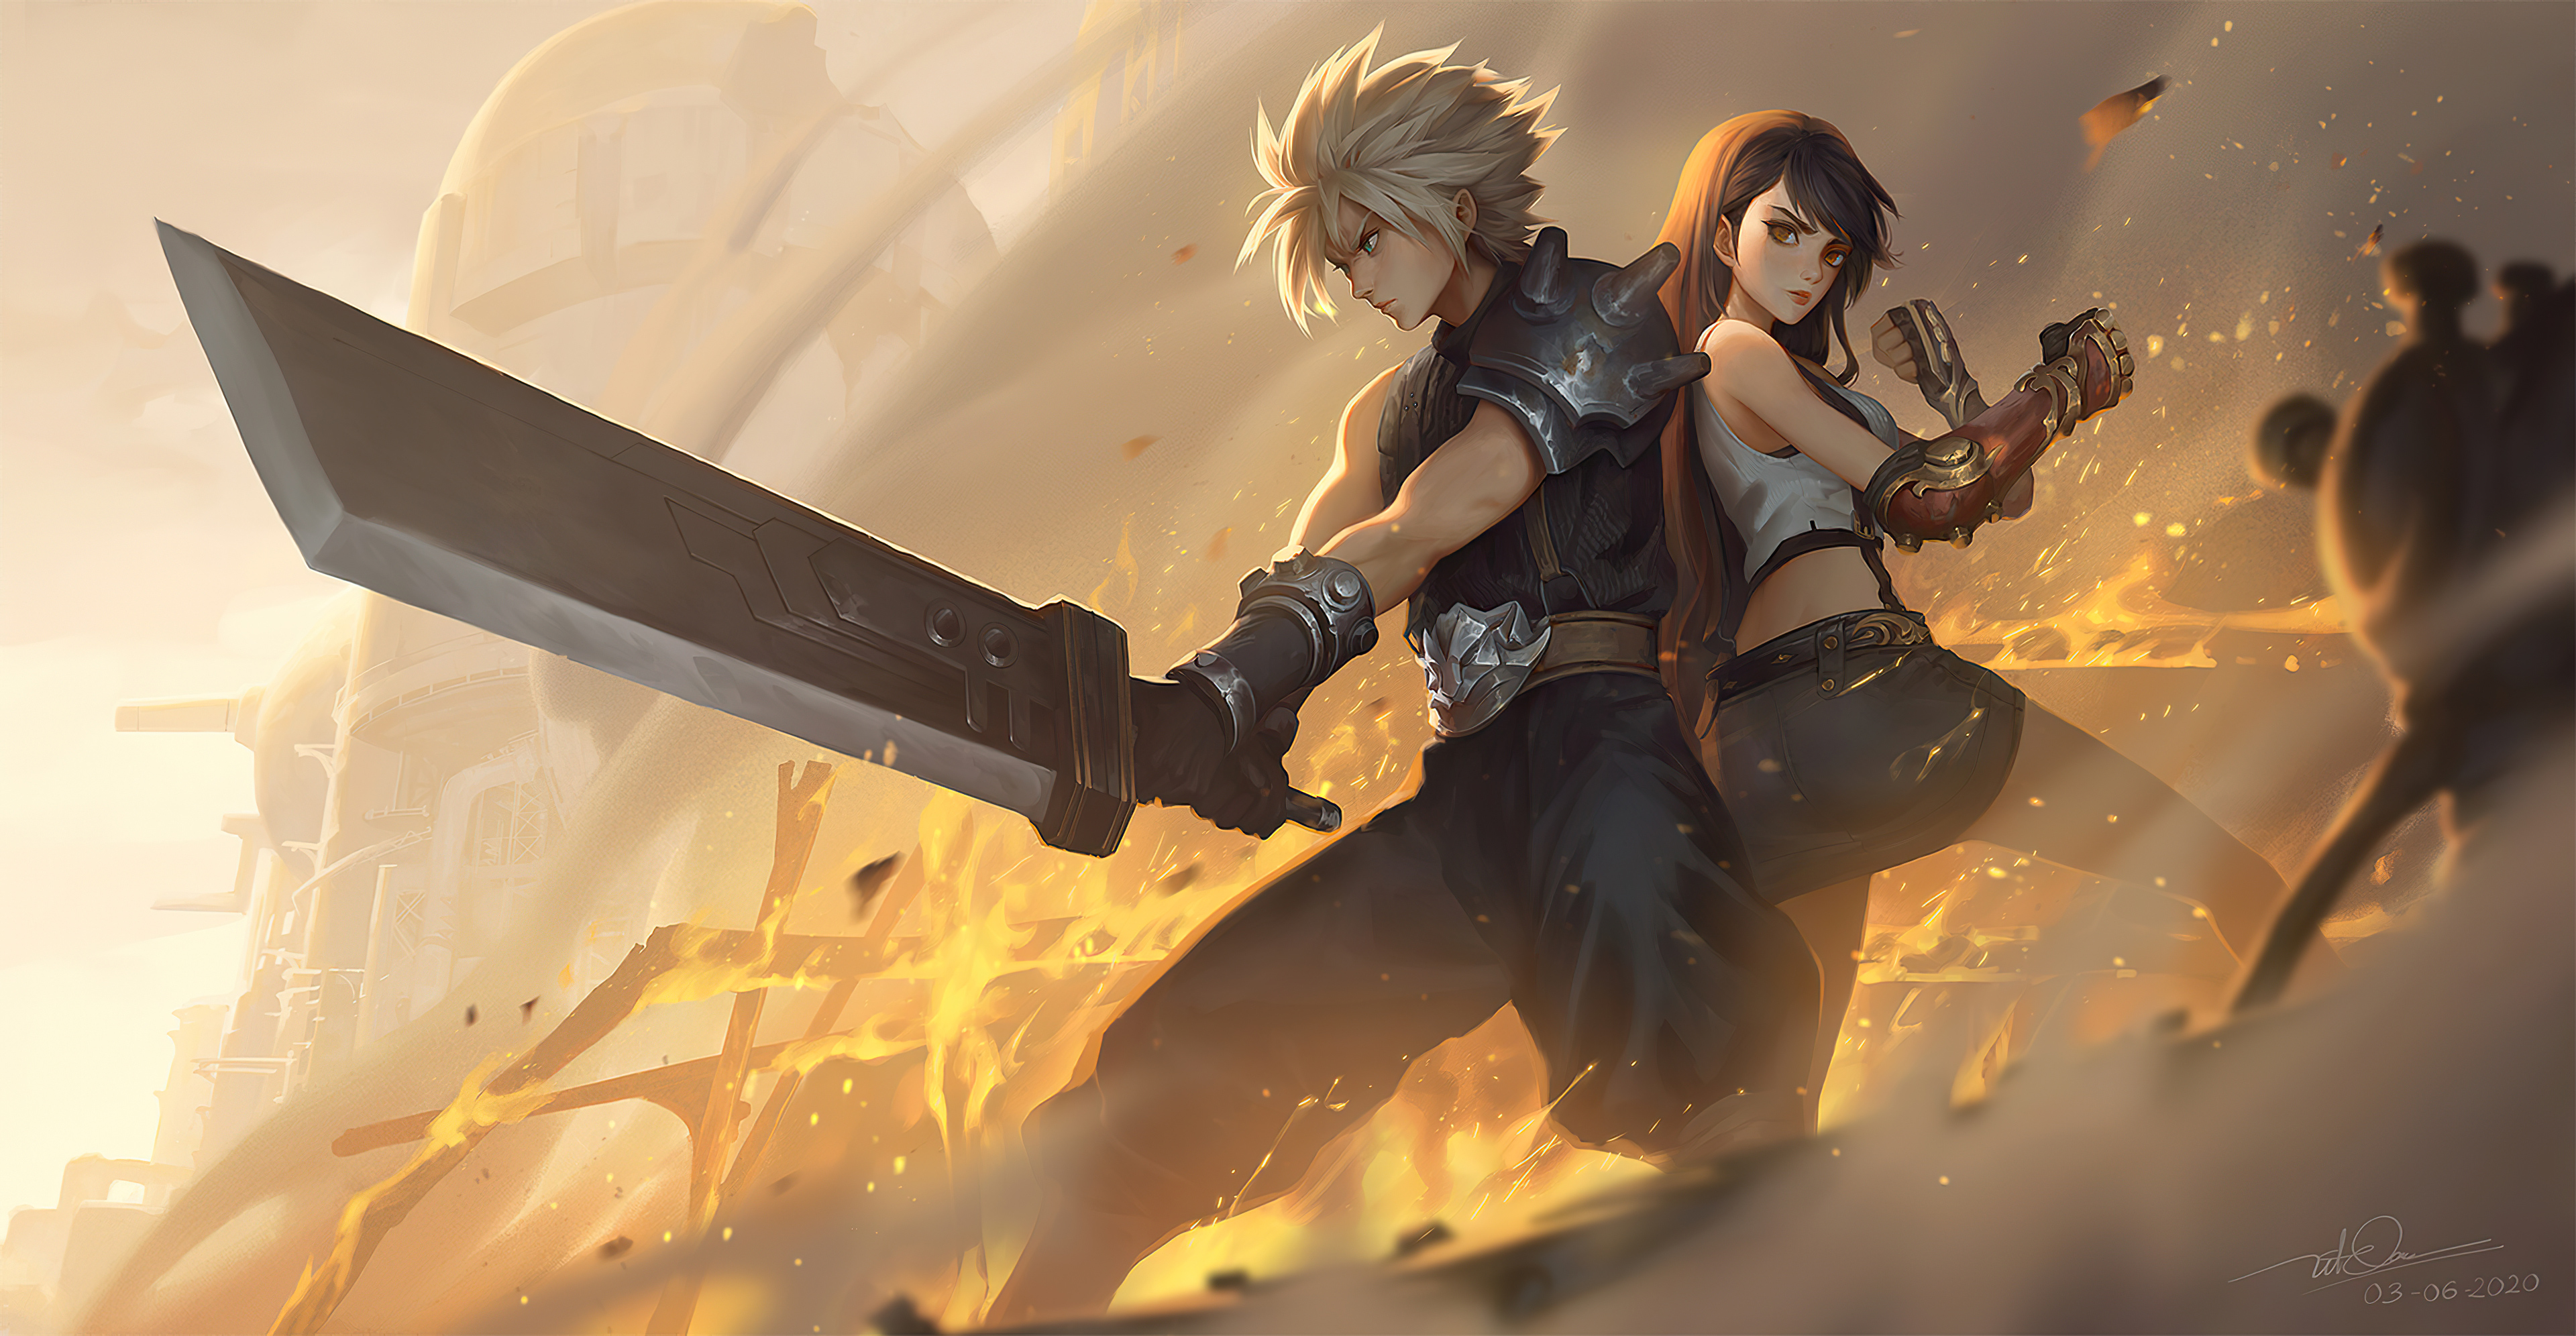 Final Fantasy VII Remake HD Wallpaper by Dao Trong Le